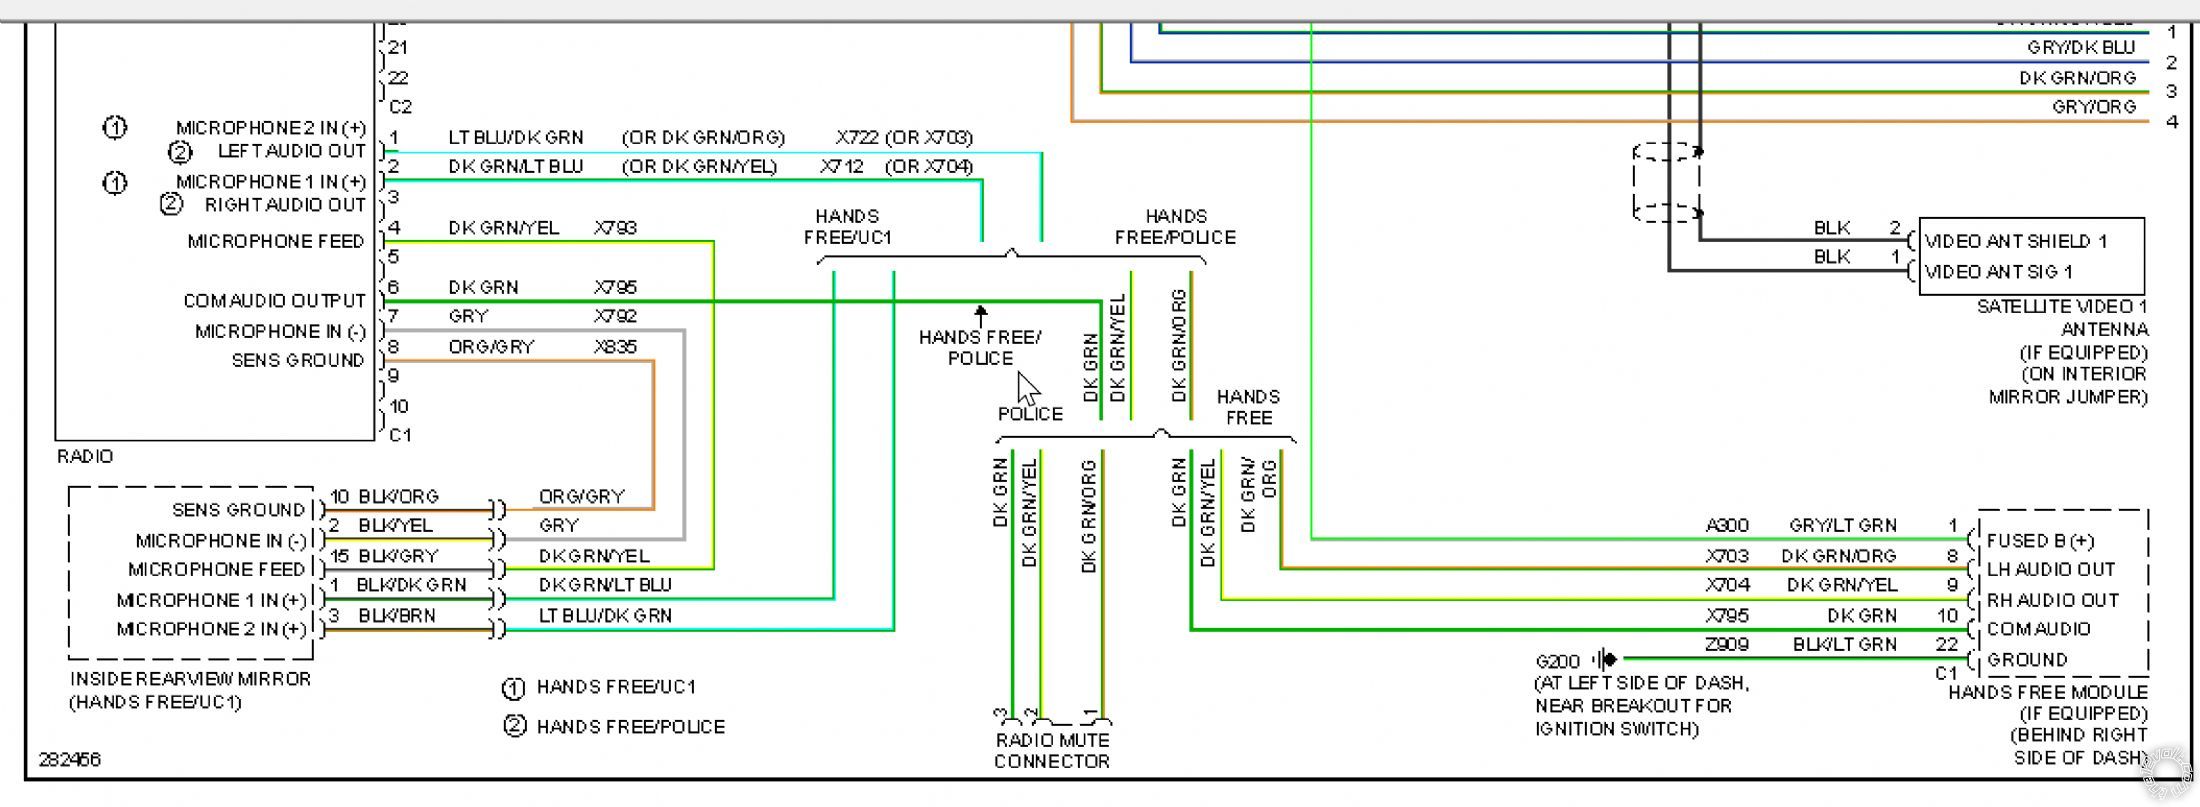 2008 Dodge Charger RT Radio Wiring Diagram Dodge Charger Sound System The12Volt